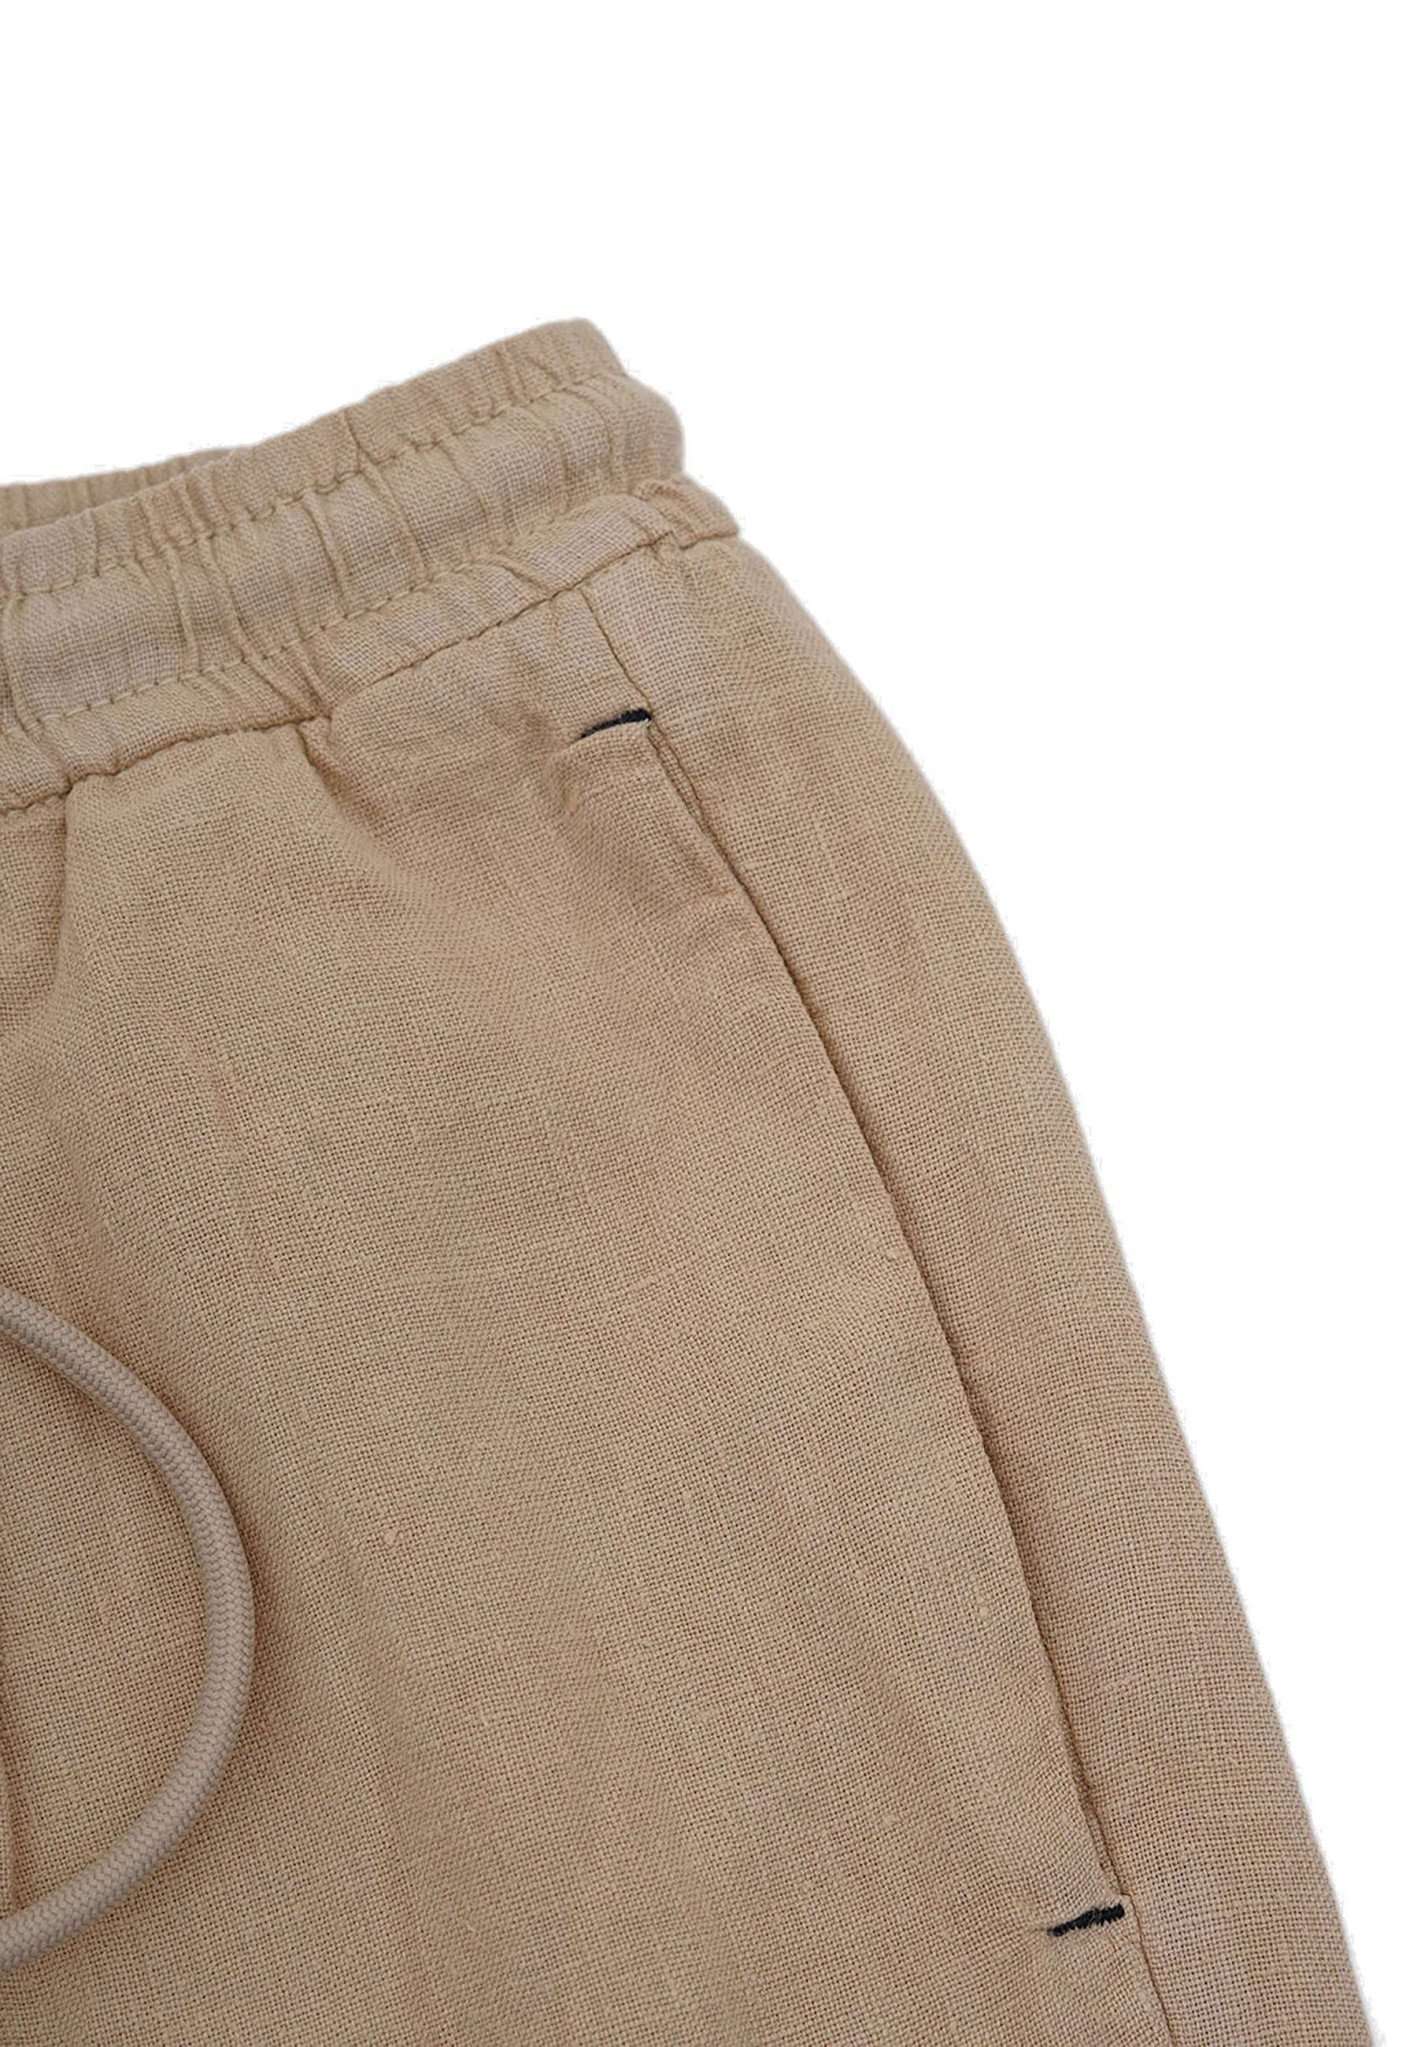 Pants Cropped Linen in Light Beige Hosen Colours and Sons   